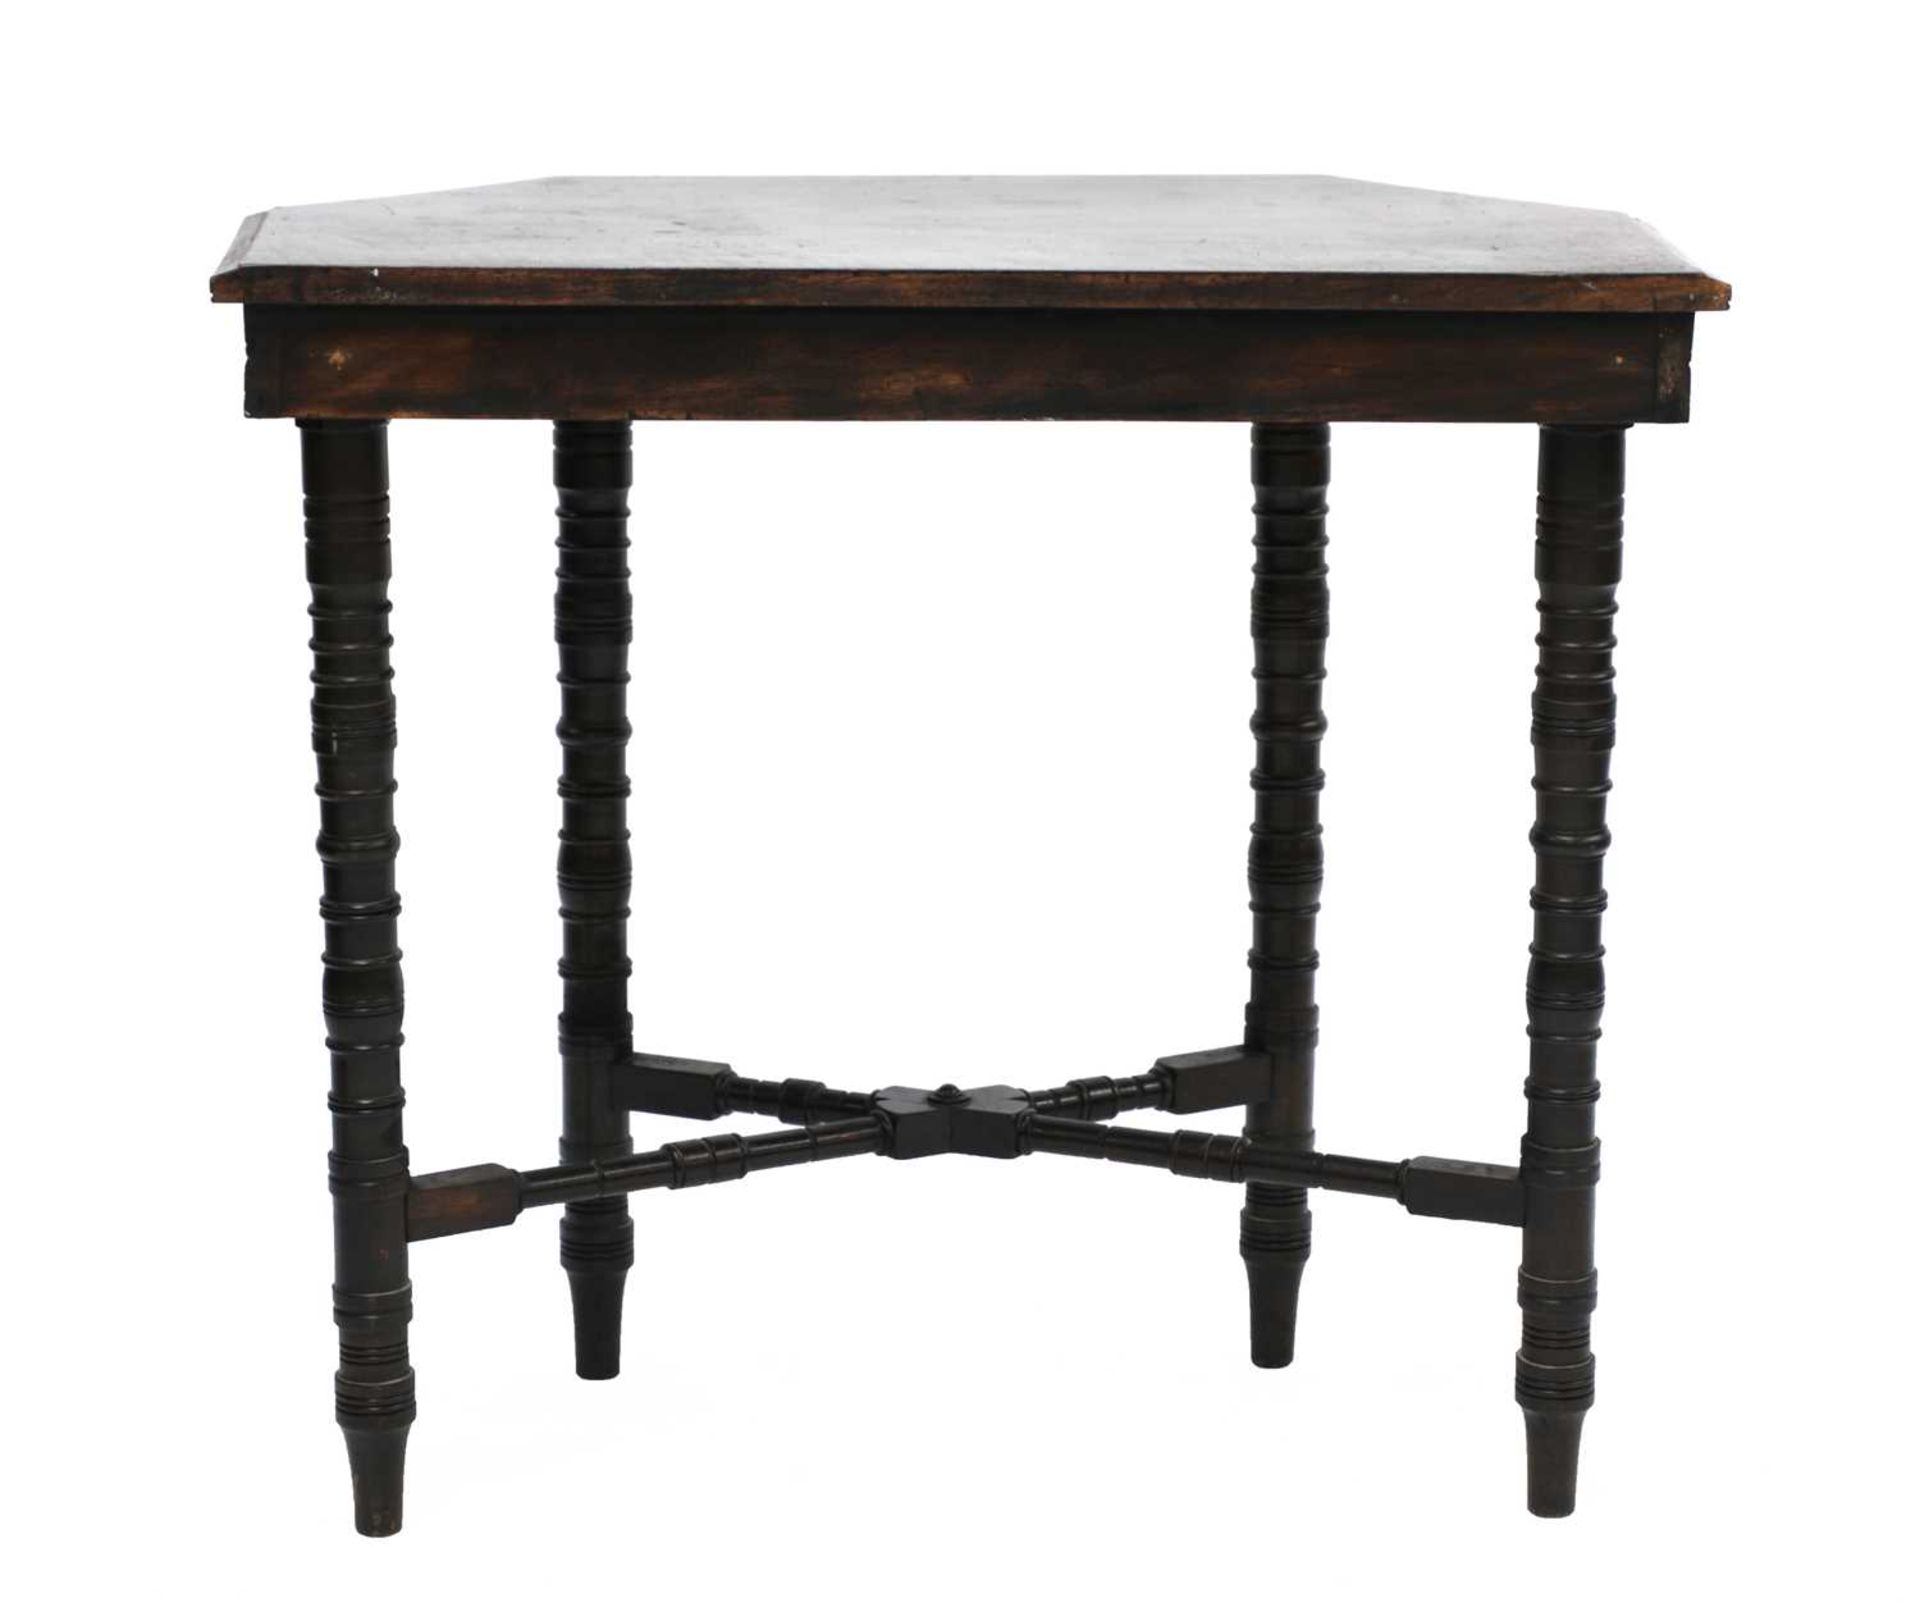 An Aesthetic ebonised side table, - Image 3 of 3